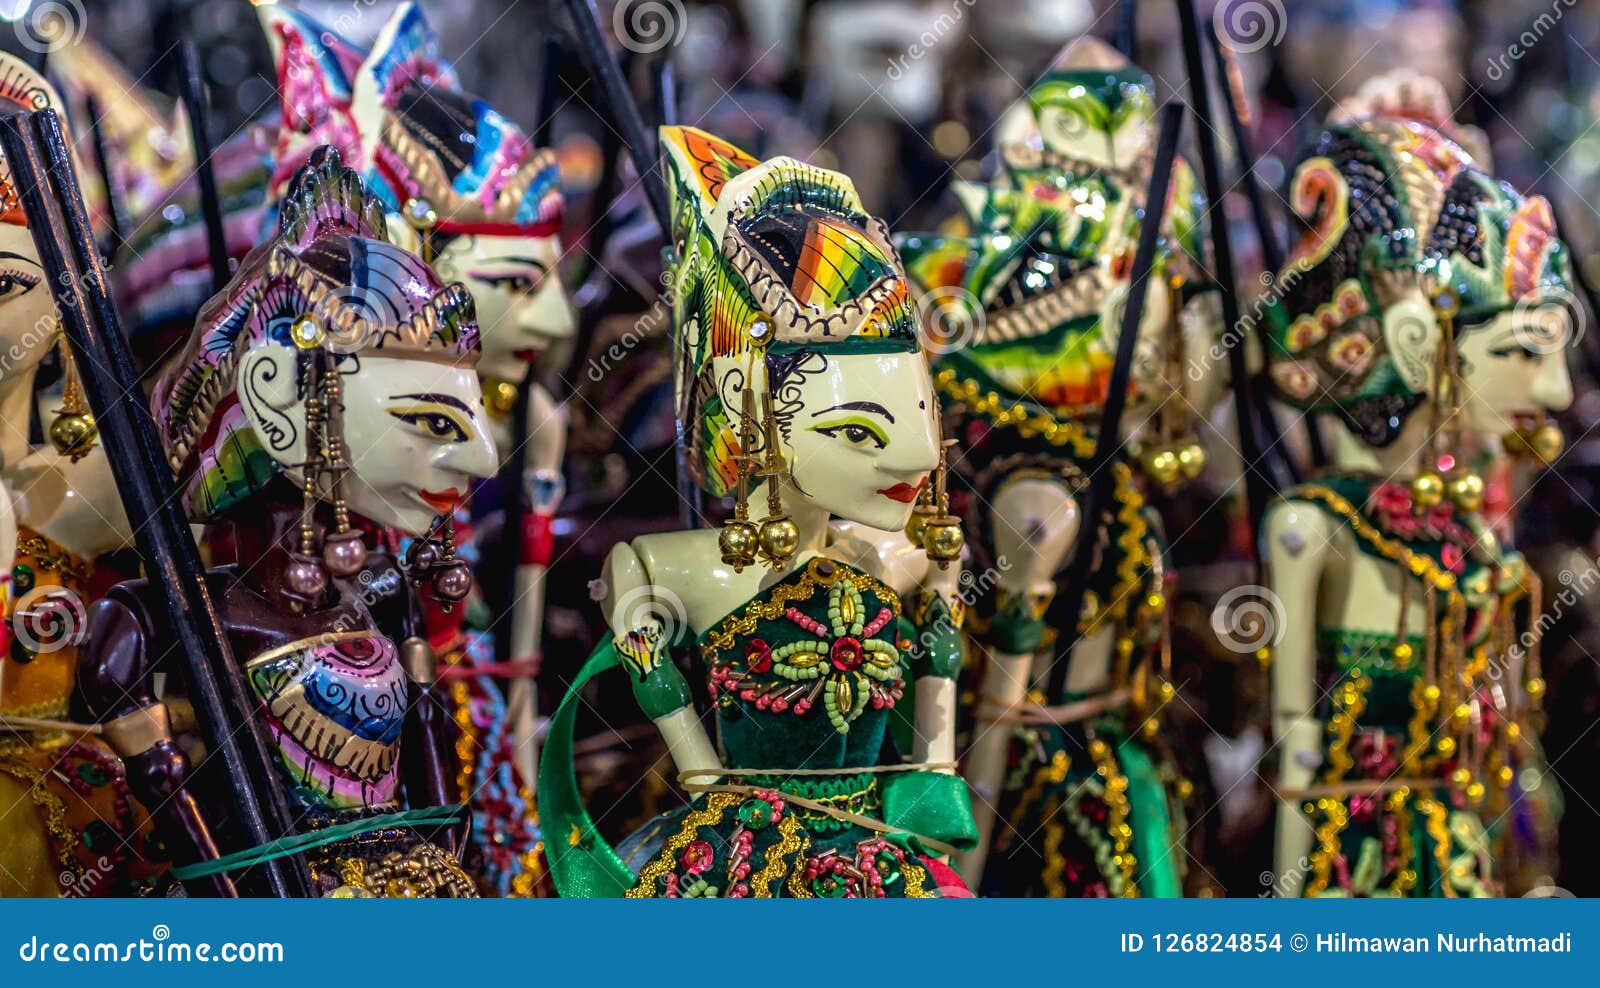 wooden puppet with traditional batik fabrique called `wayang golek` from java